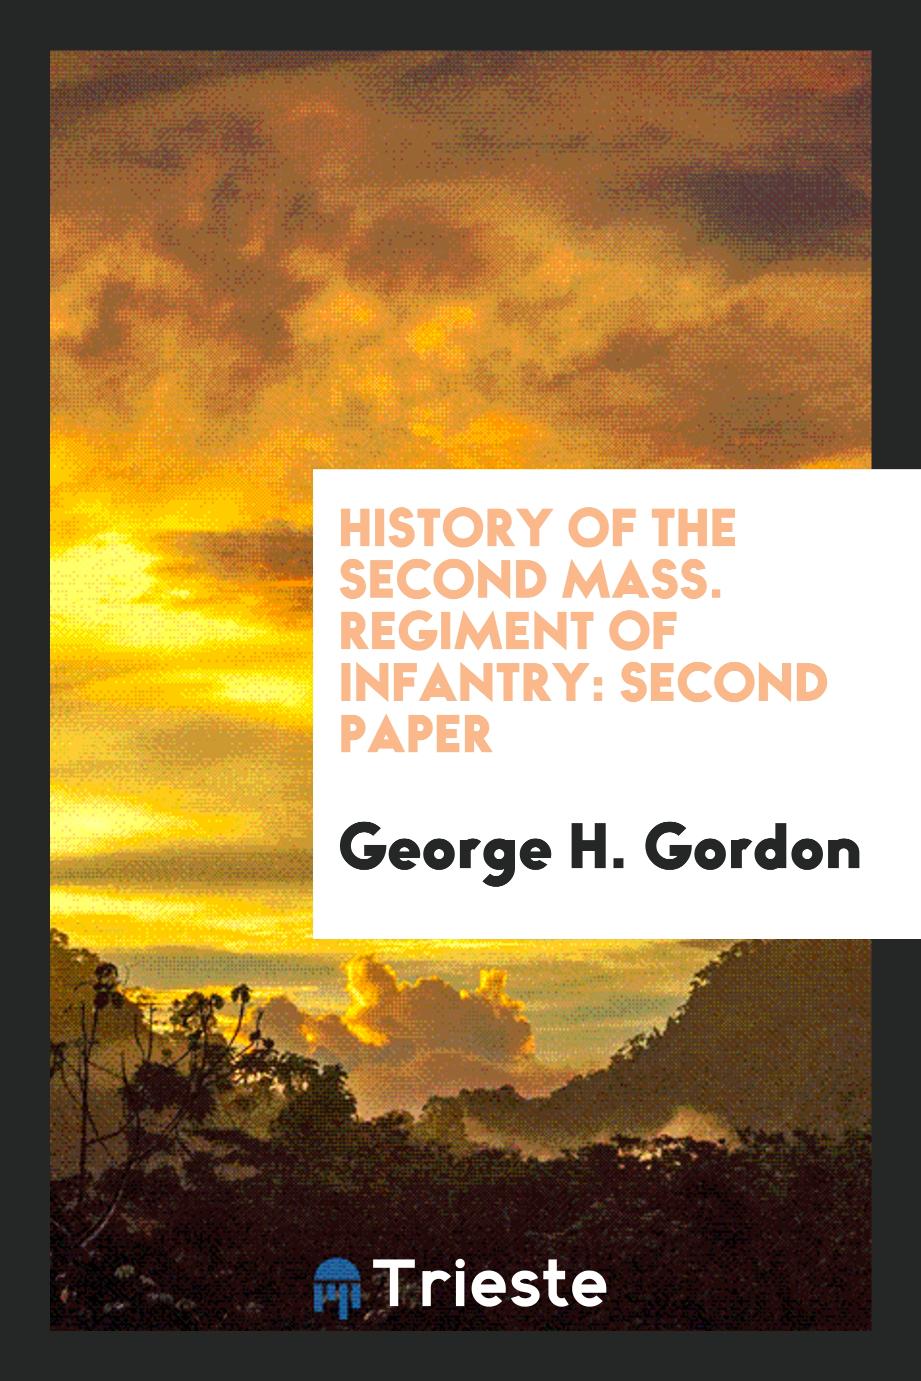 History of the Second Mass. Regiment of Infantry: second paper